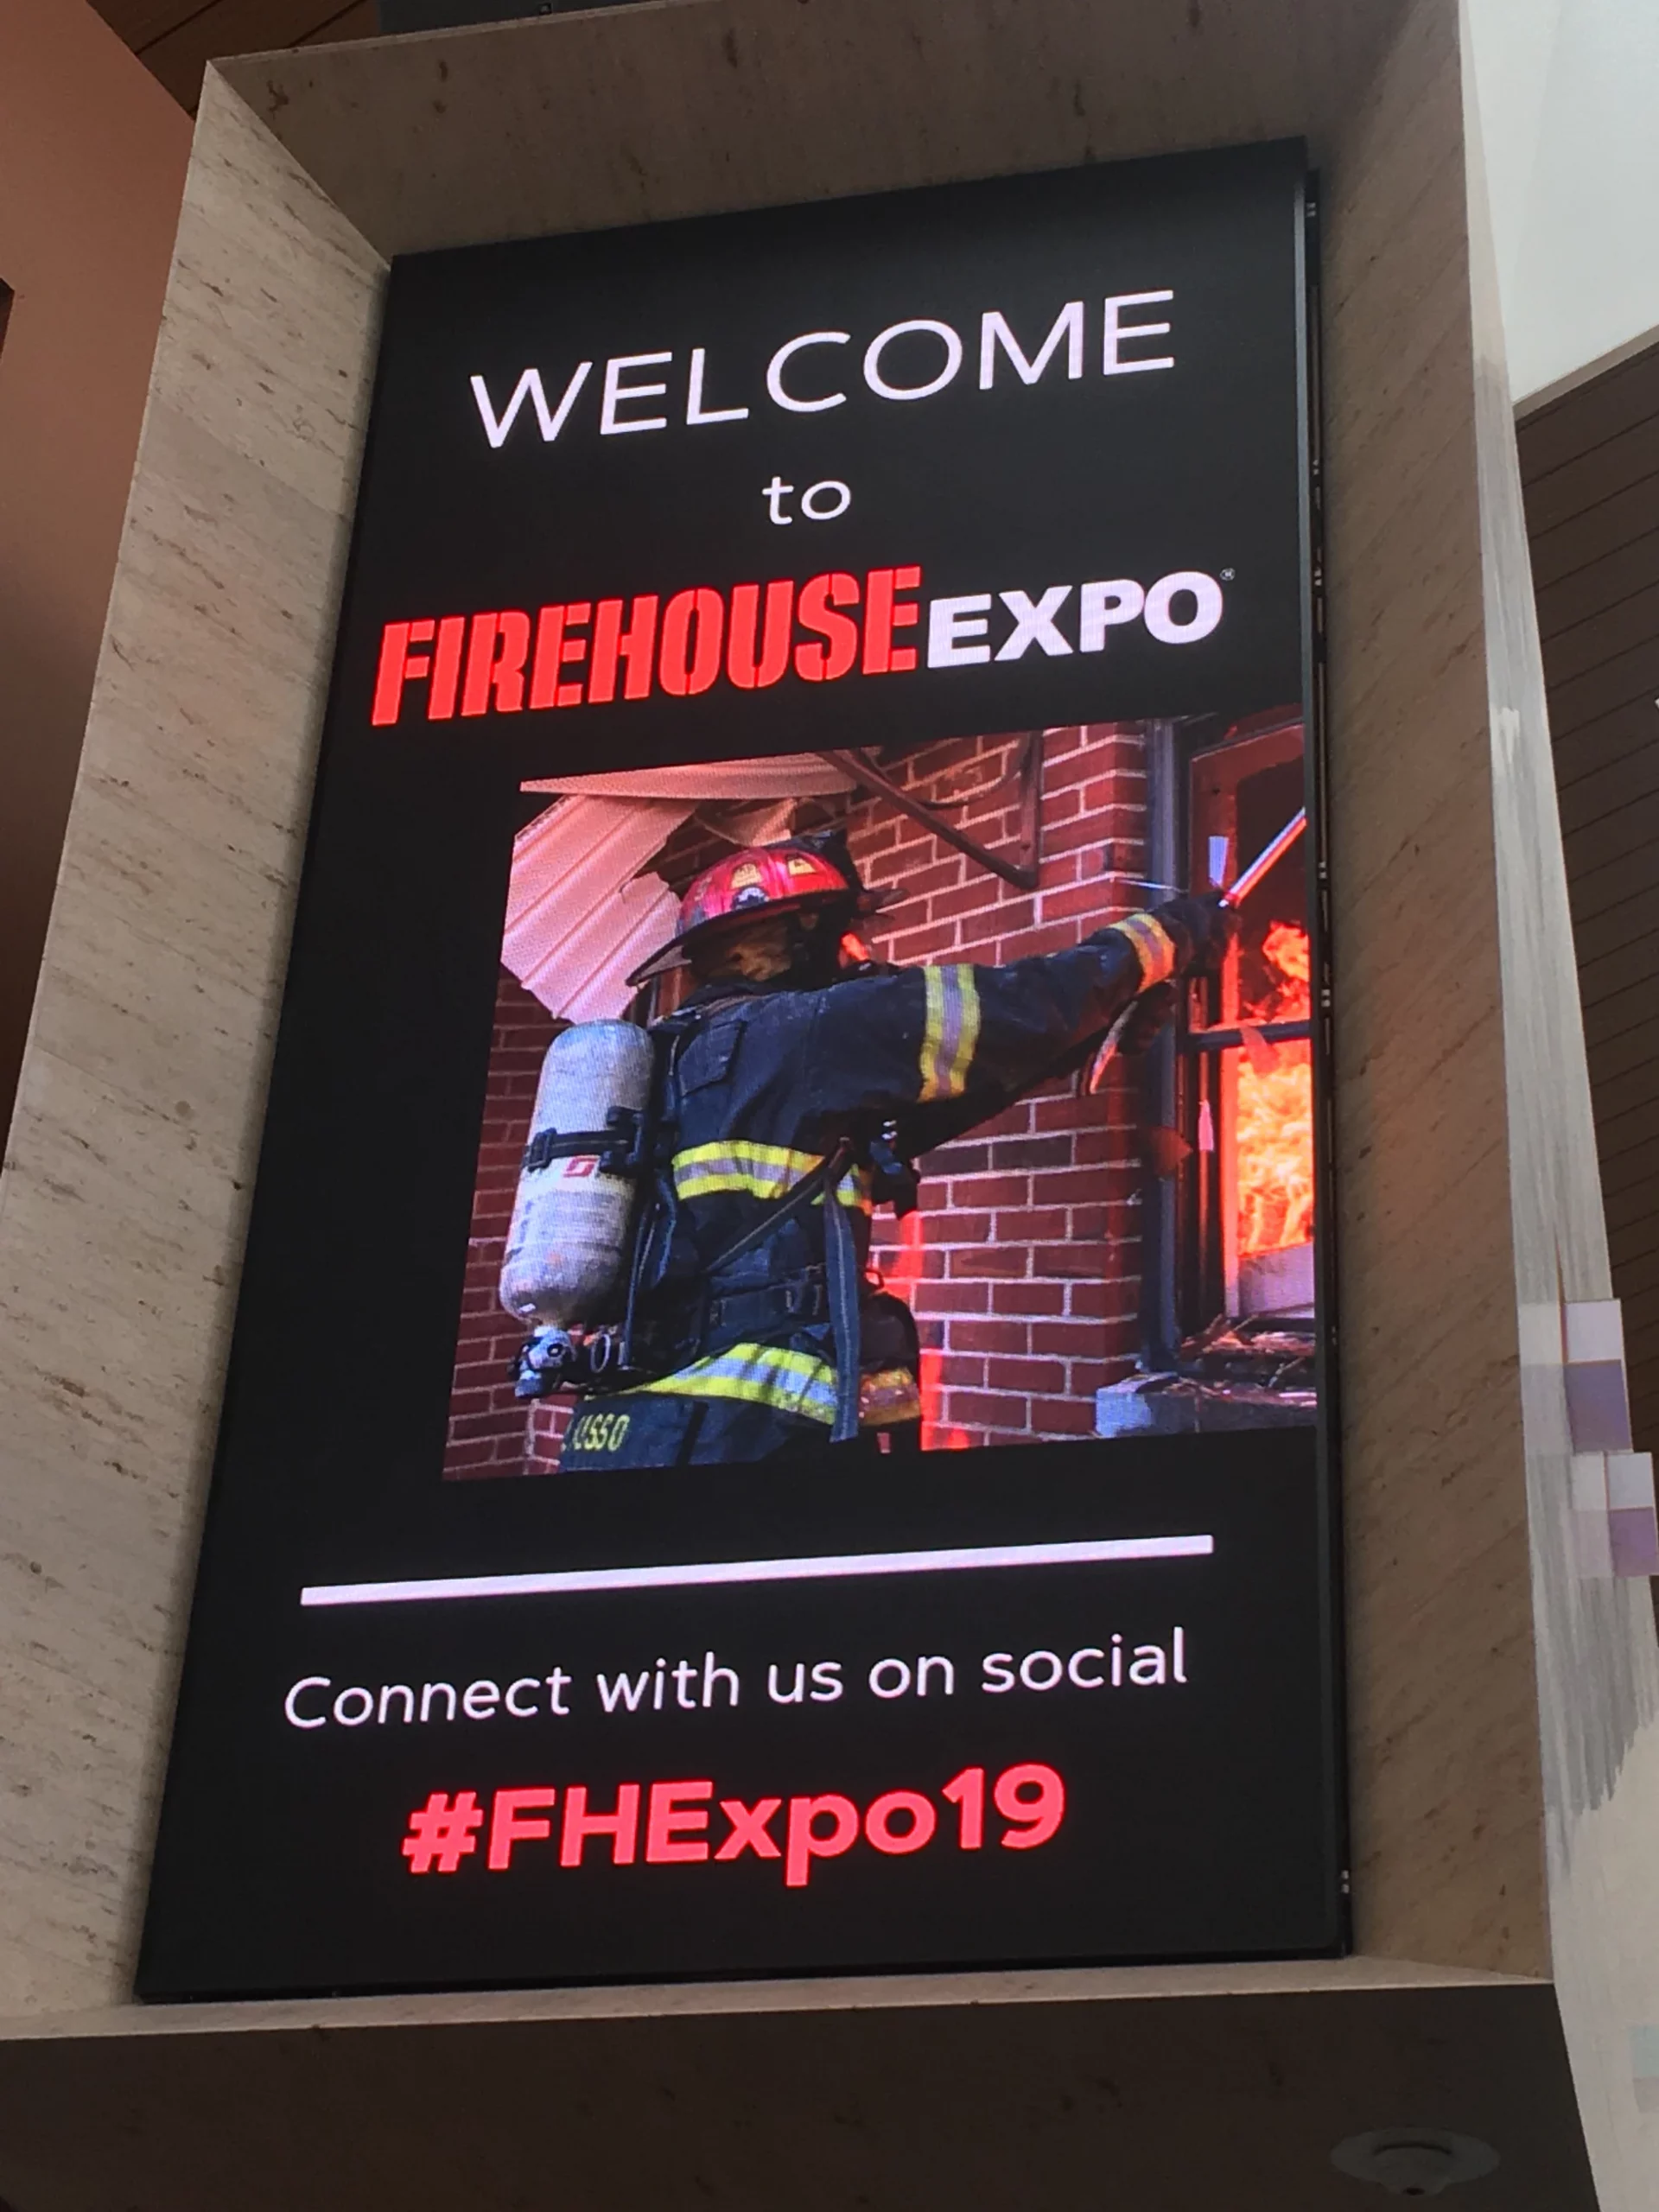 A digital sign reads, "Welcome to Firehouse Expo. Connect with us on social #FHExpo19."